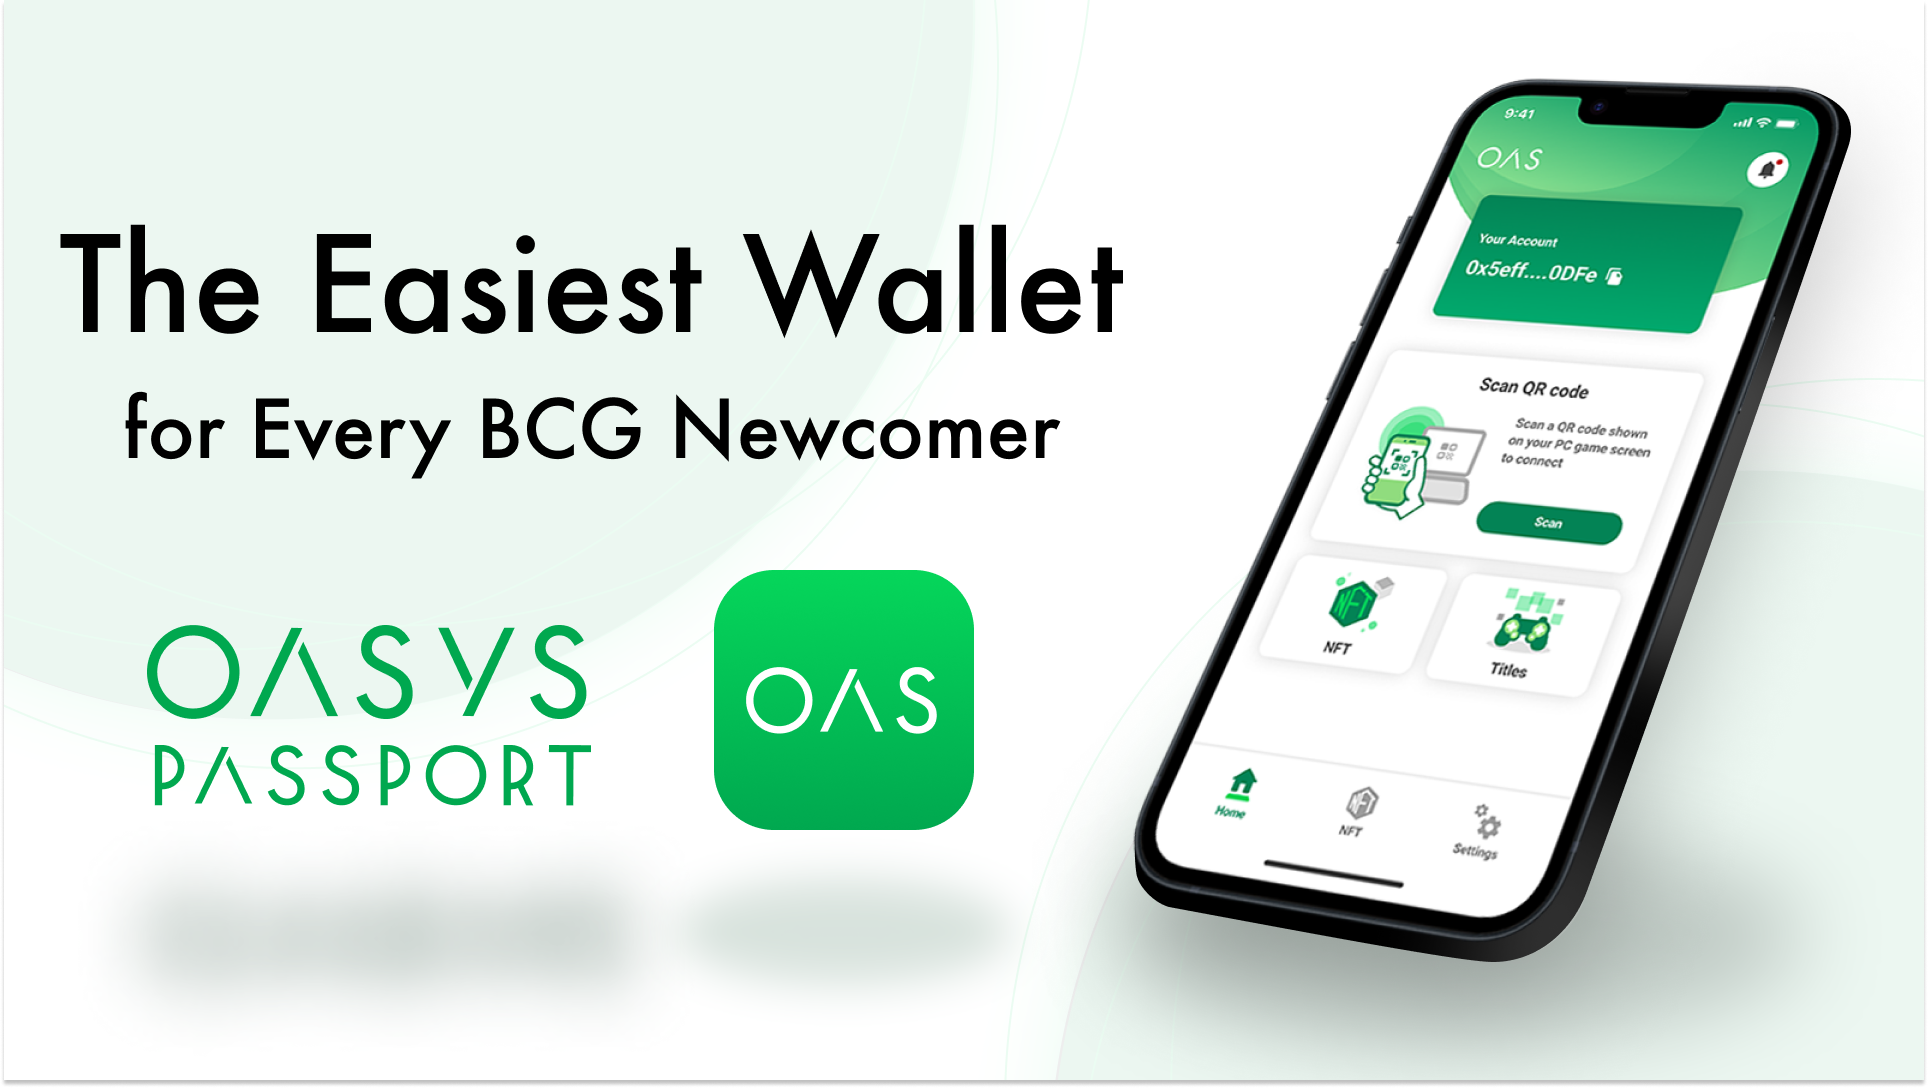 double jump.tokyo Launches Alpha Version of Oasys Passport a New Innovative Specialized Wallet 10